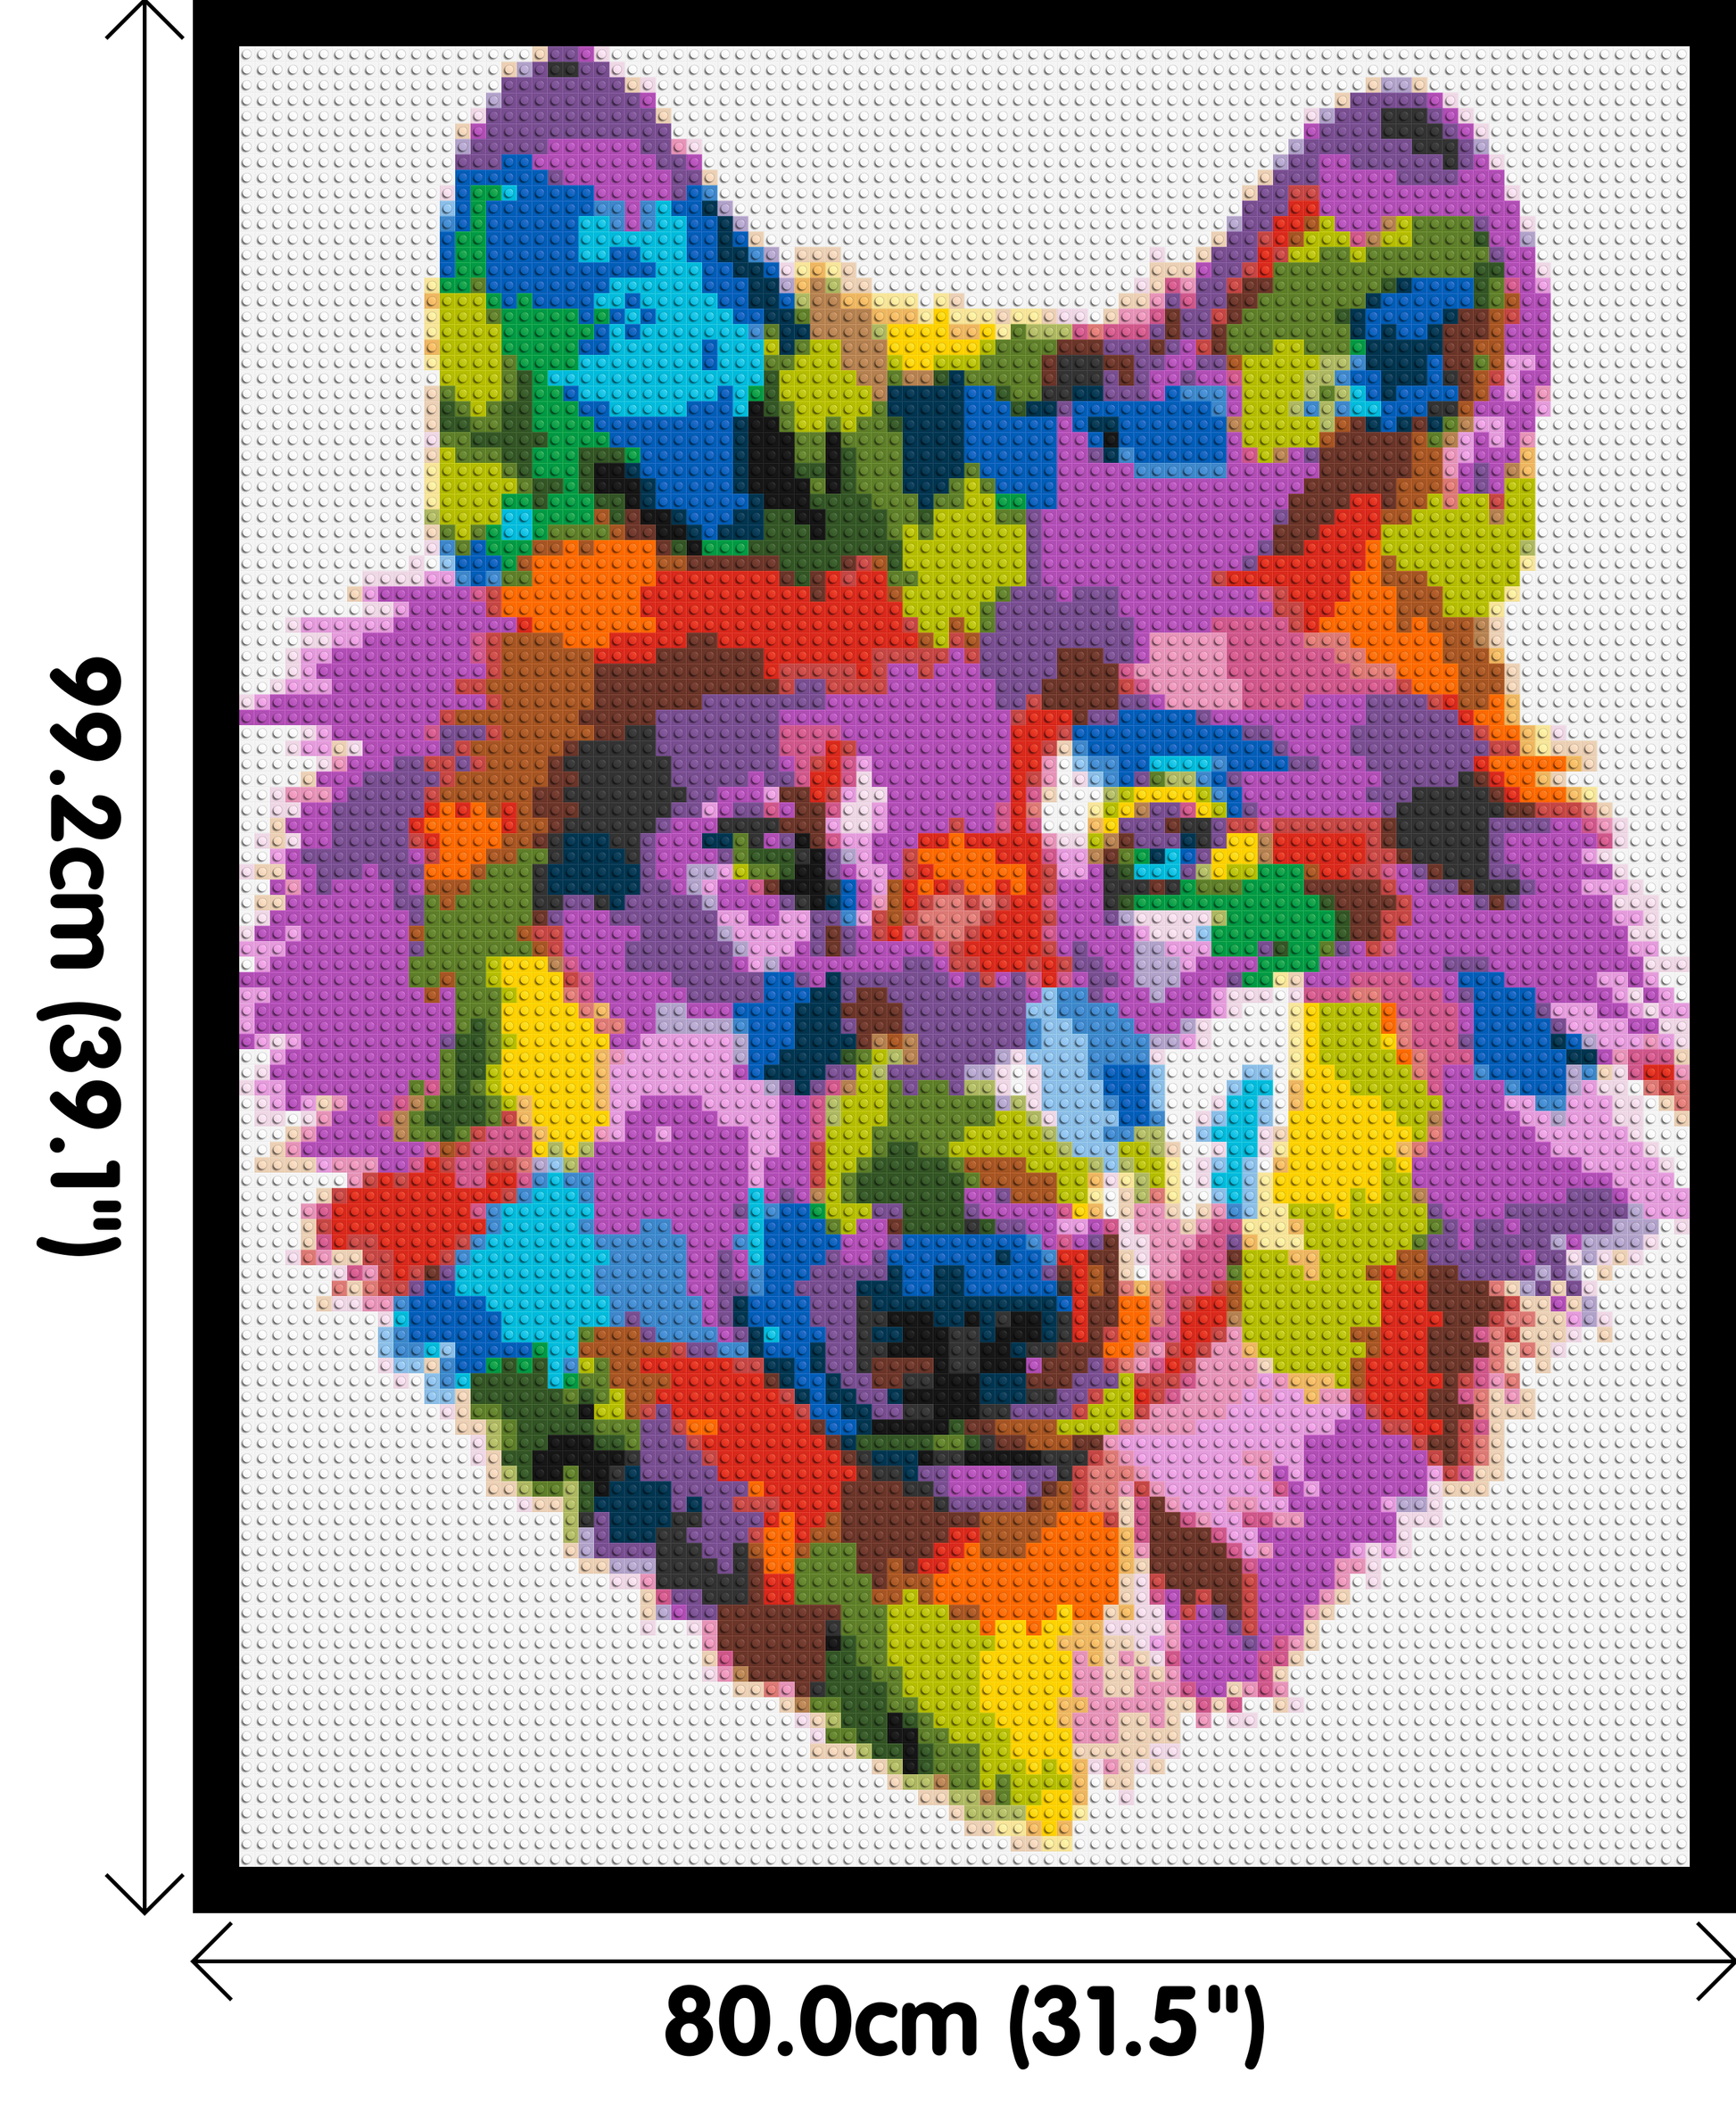 Wolf Colourful Pop Art - Brick Art Mosaic Kit 4x5 dimensions with frame